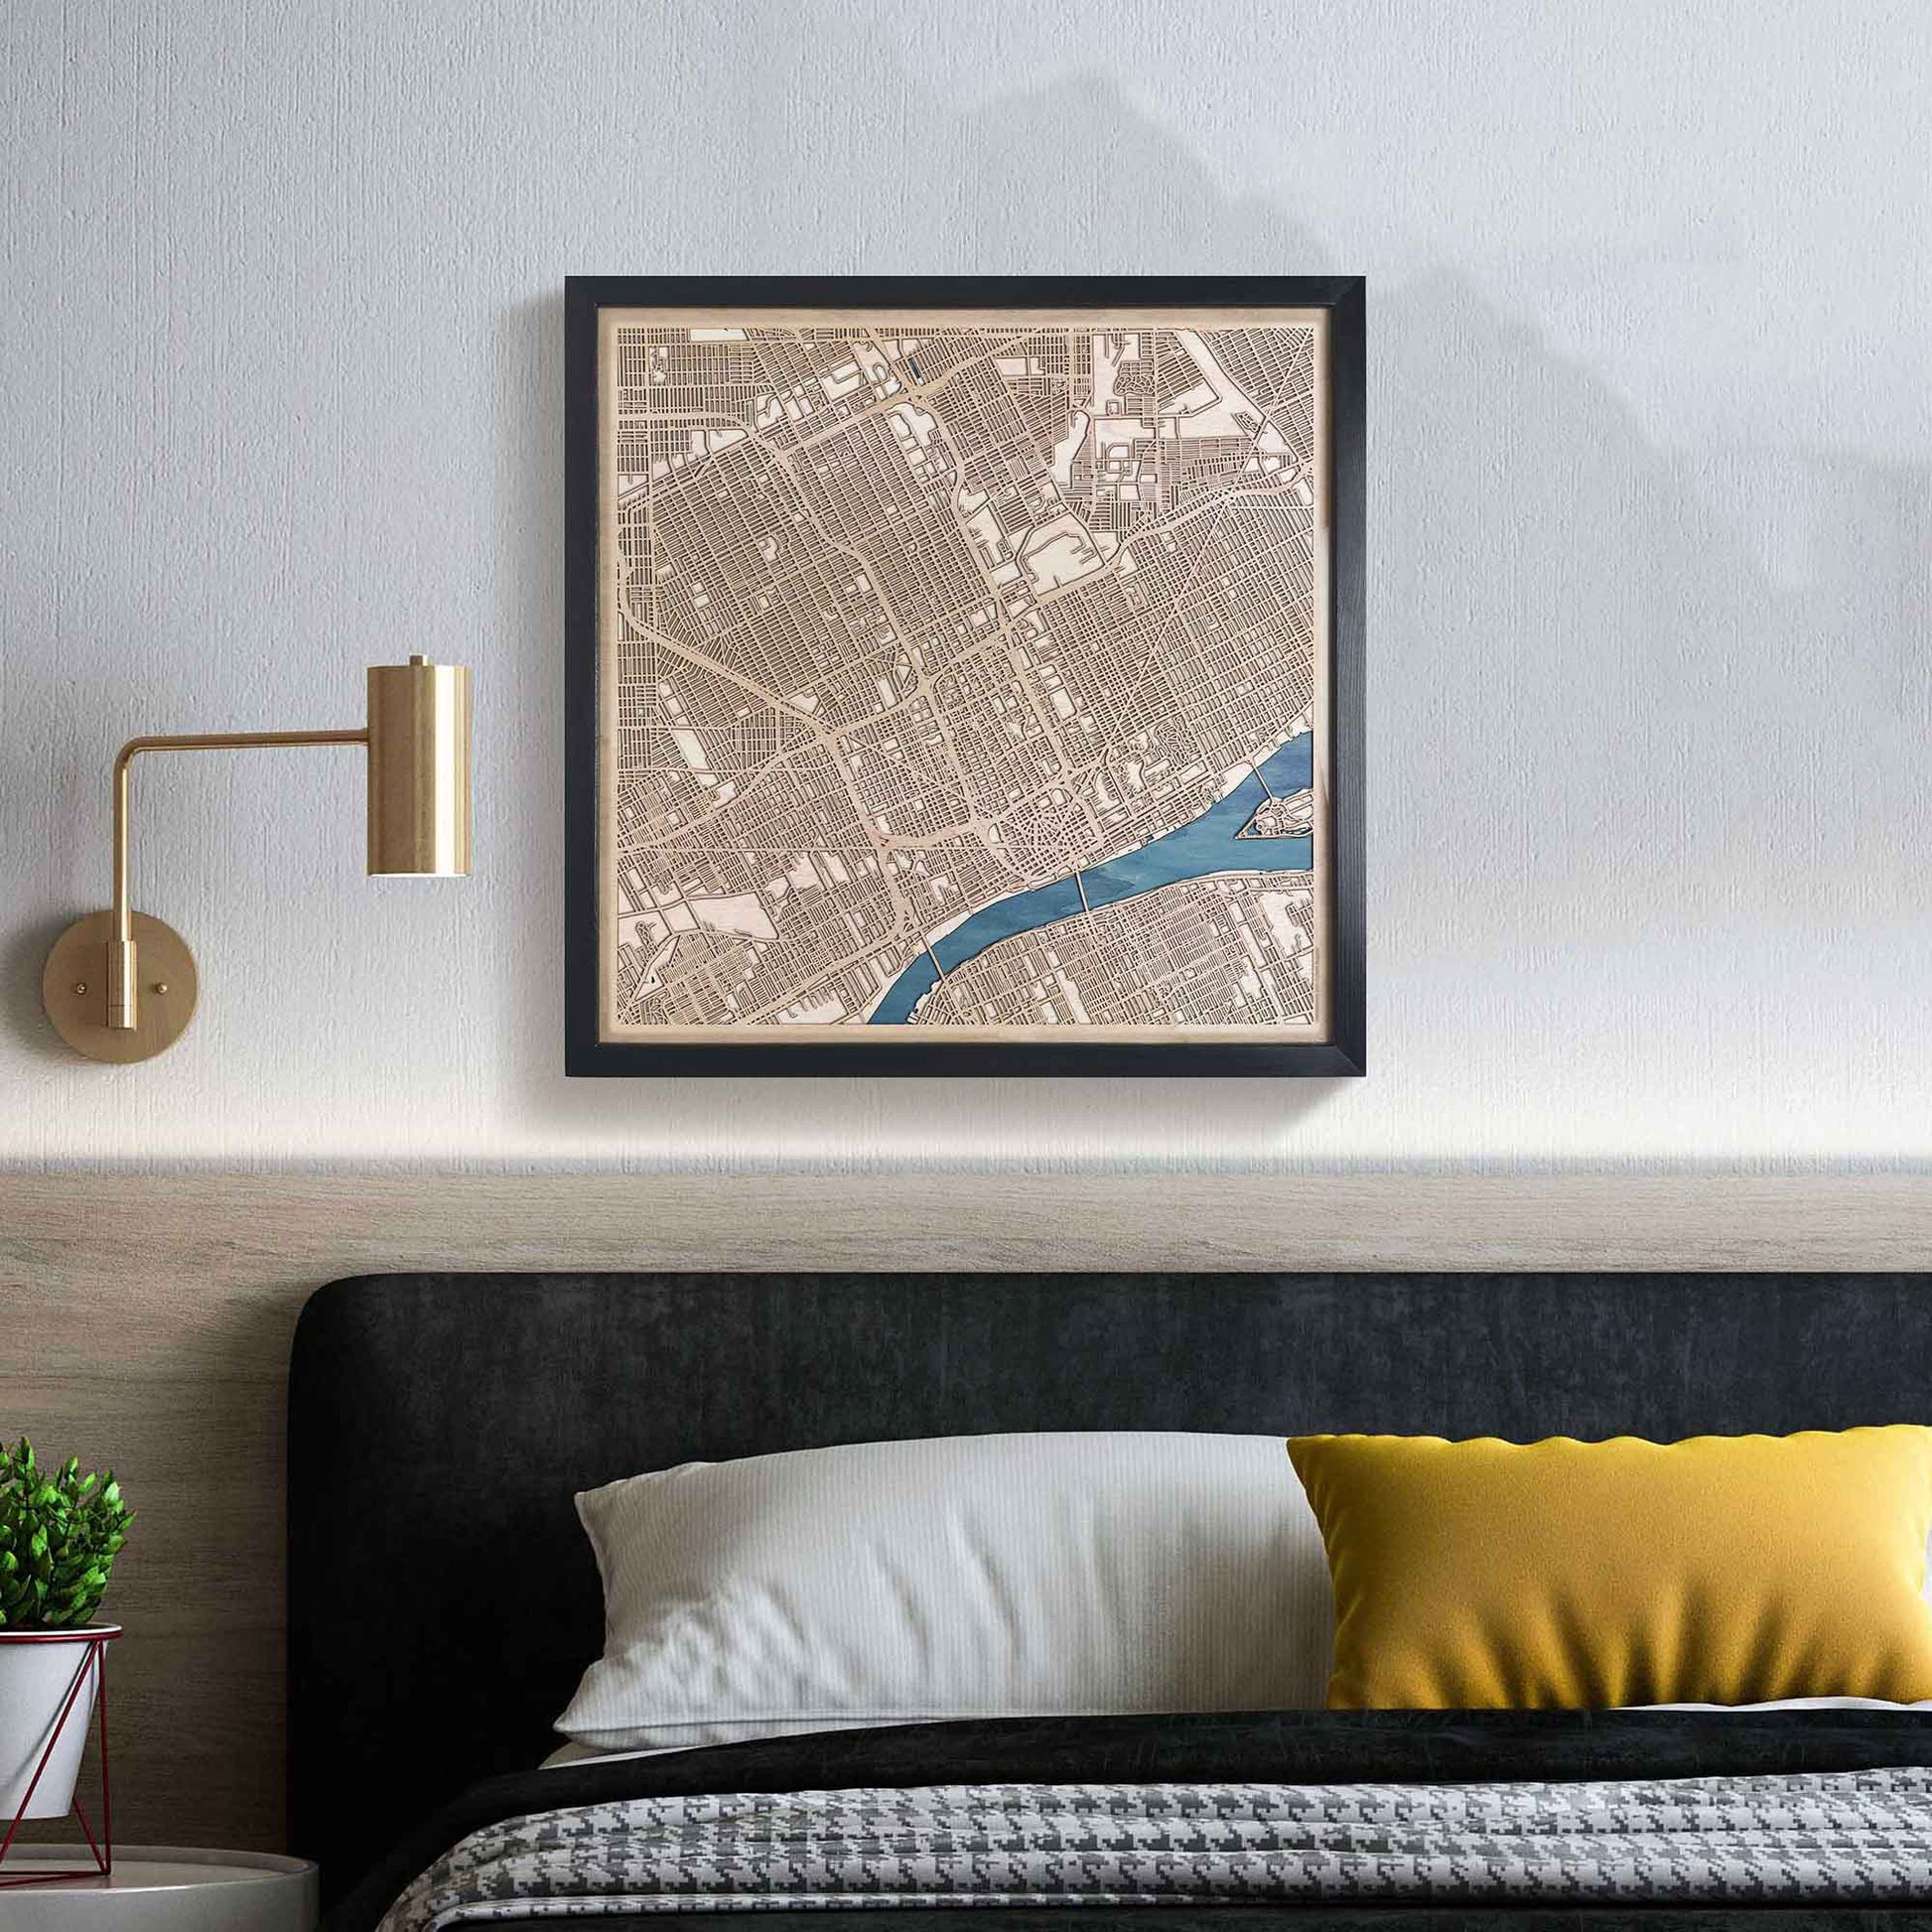 Detroit Wooden Map by CityWood - Custom Wood Map Art - Unique Laser Cut Engraved - Anniversary Gift